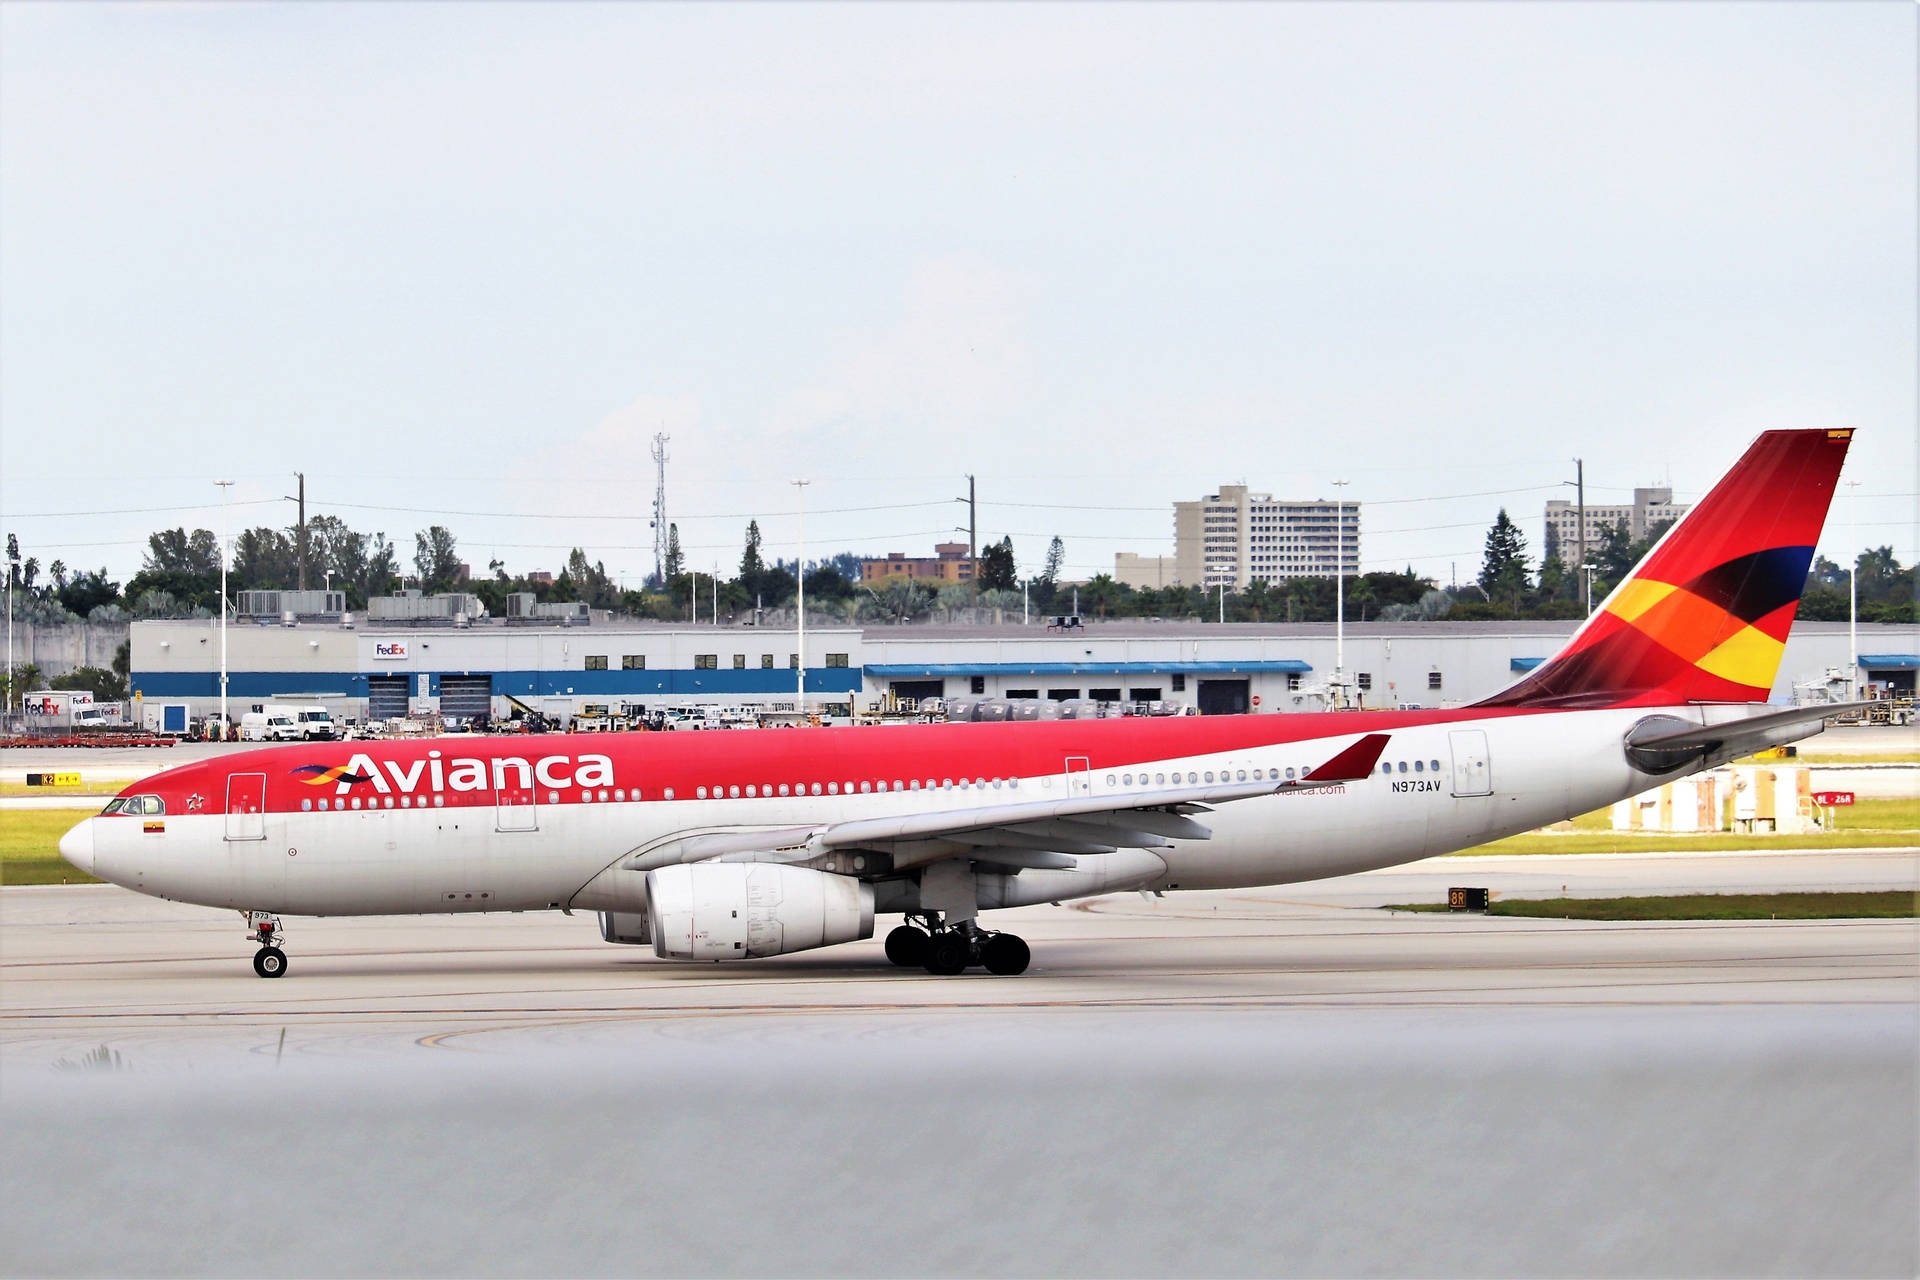 Avianca Airline Airbus A330 Aircraft At Airport Wallpaper